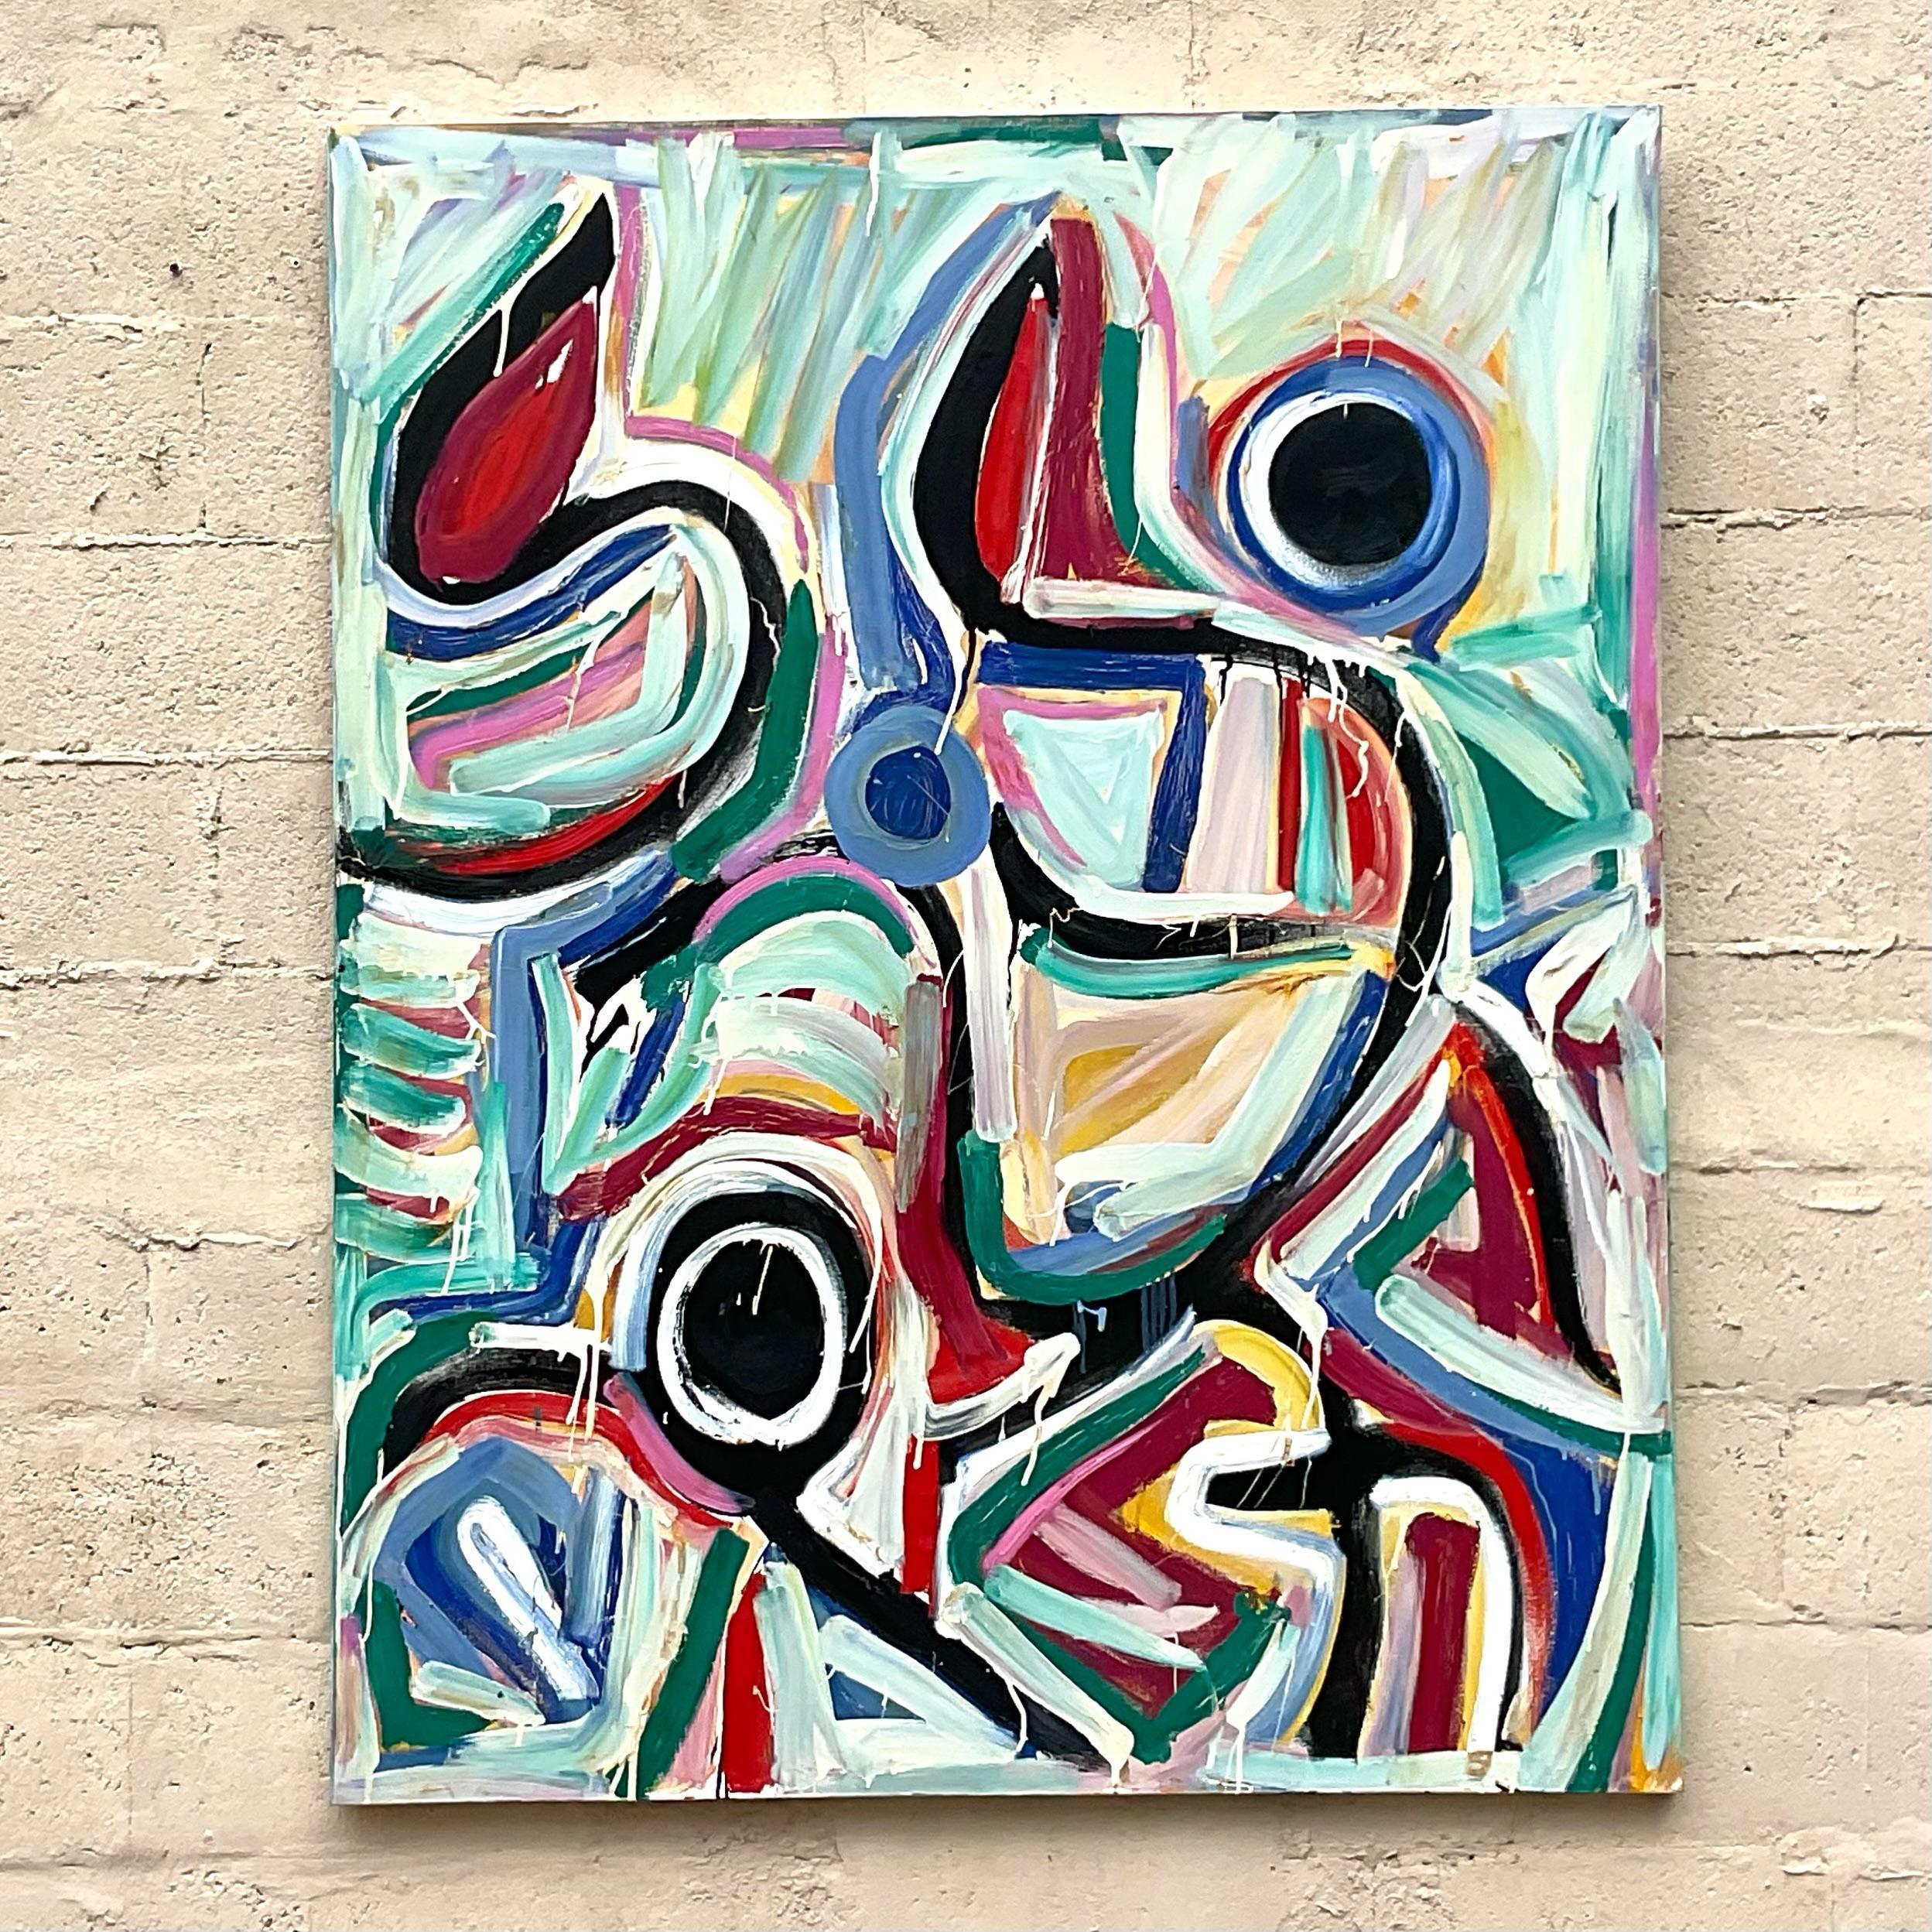 Incredible vintage work by Terry J Frid, signed and dated July ‘98. The monumental piece has incredible movement and color that could transform any space. An underlying realm of geometric shapes are highlighted with splashes of color and dramatic